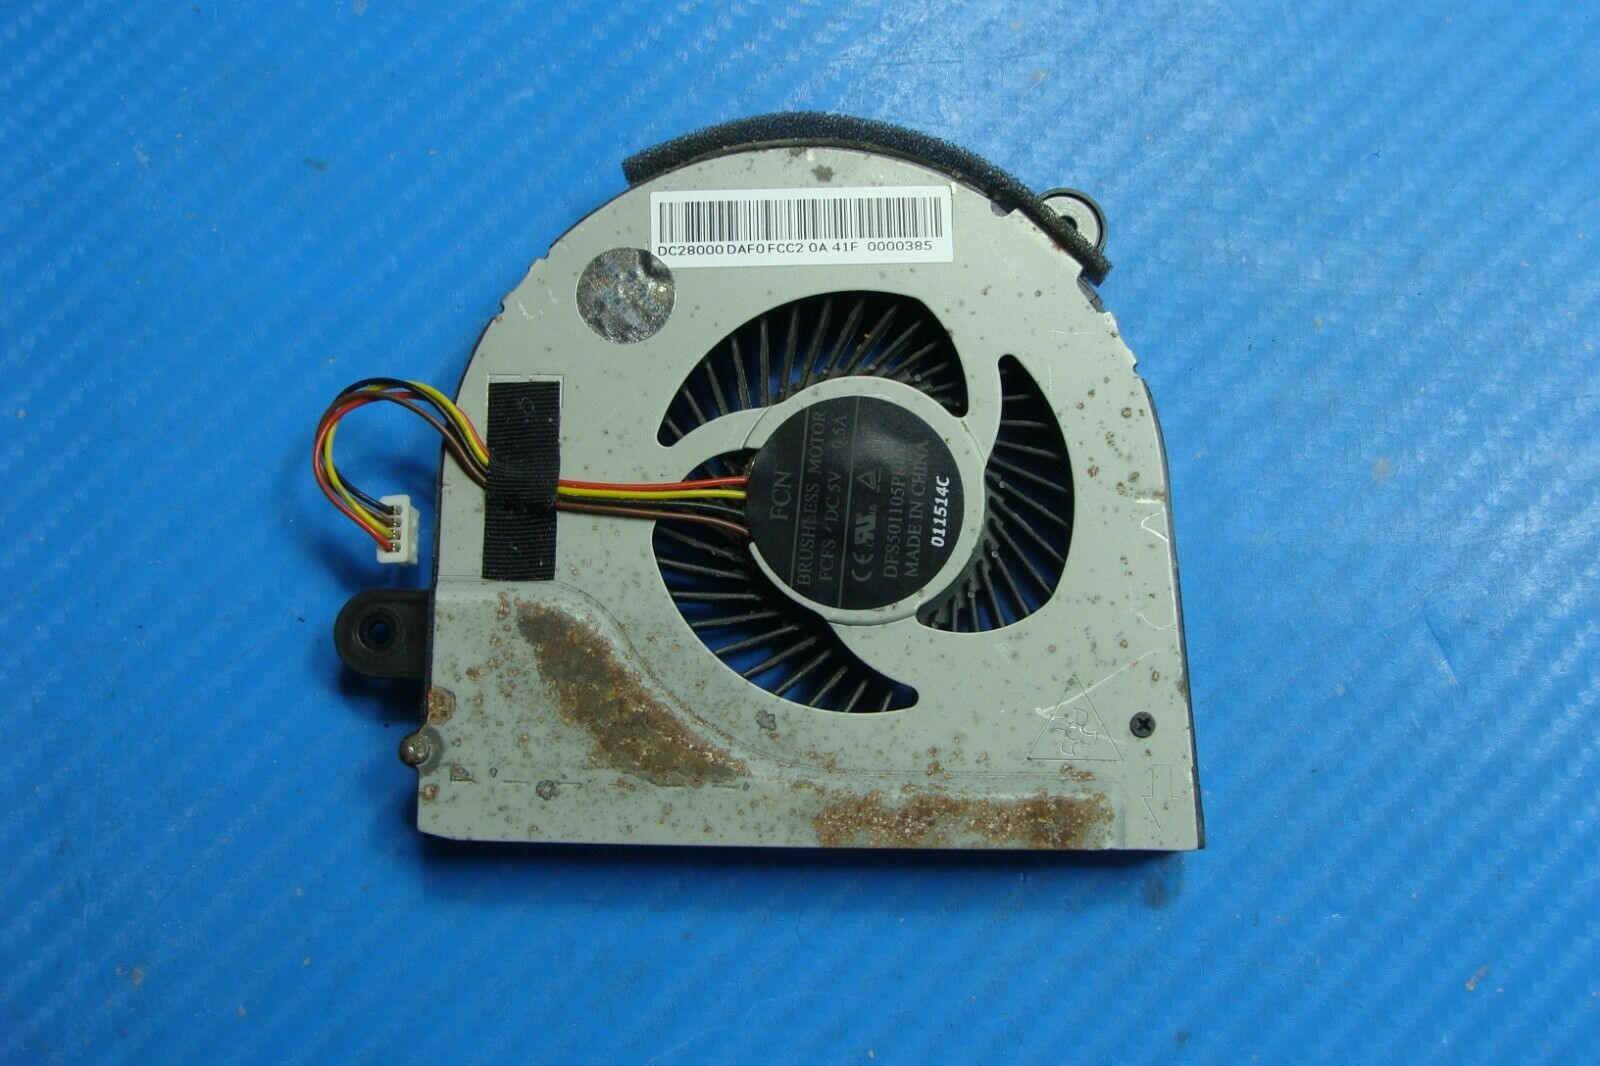 Lenovo 15.6" G510s Touch Genuine Laptop CPU Cooling Fan ds28000daf0 